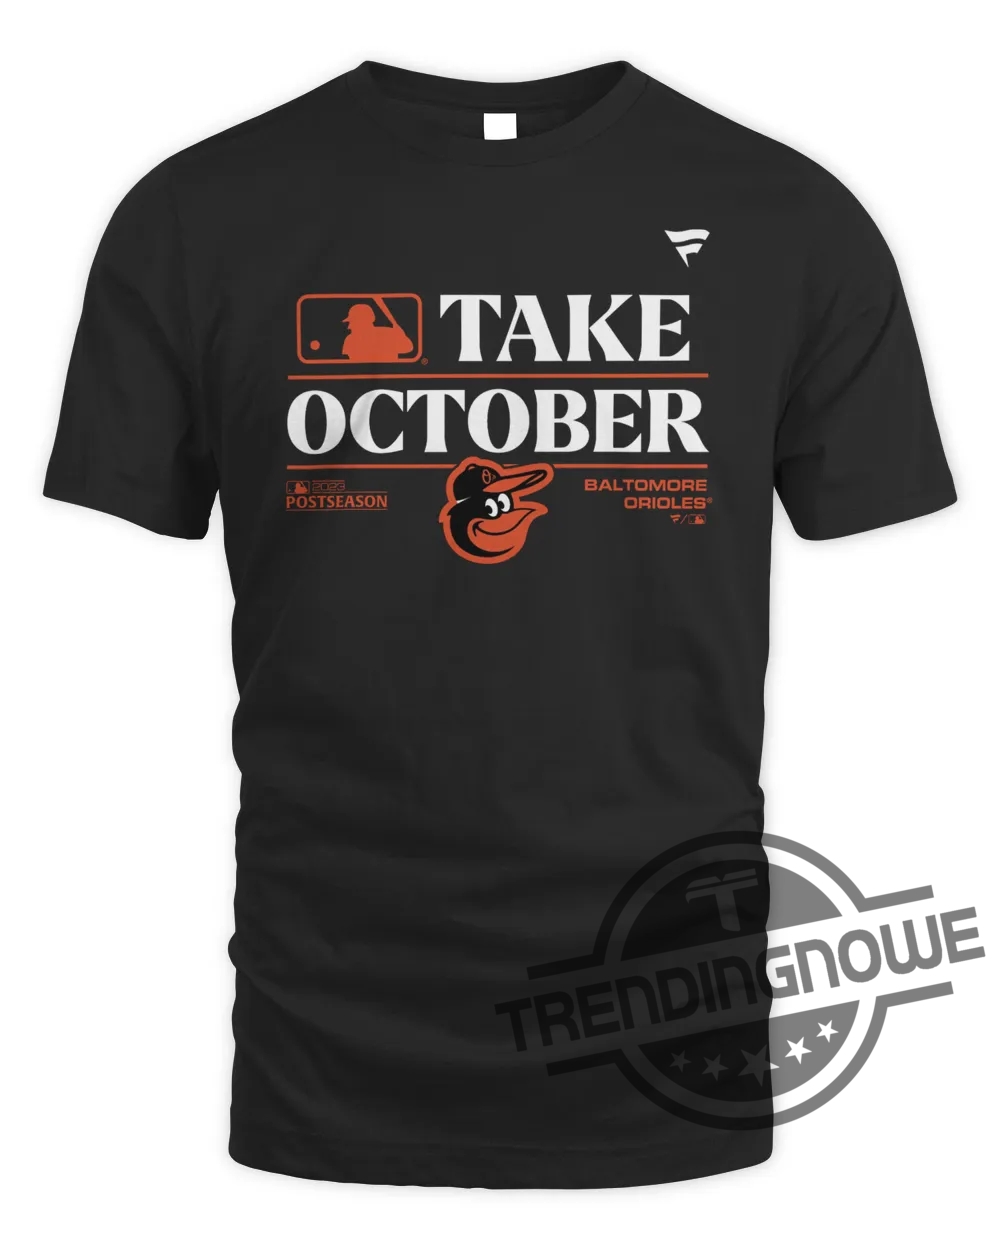 Orioles Take October Shirt The Orioles Shirt Walking Abbey Road